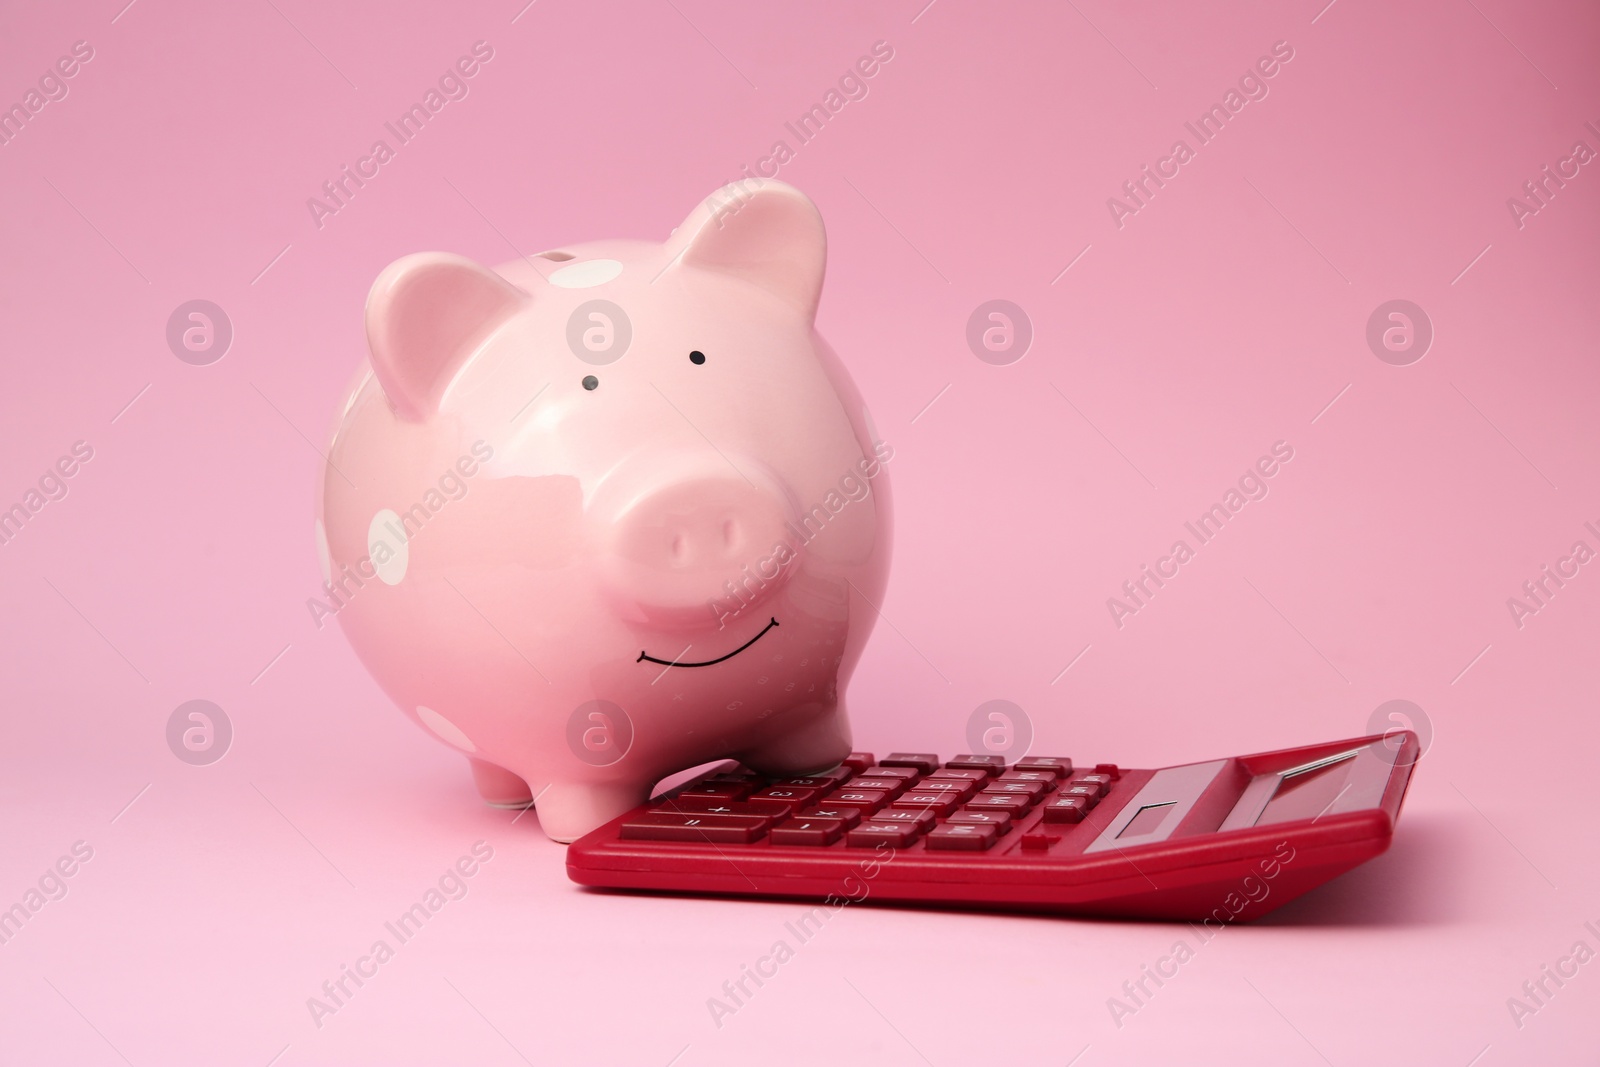 Photo of Piggy bank and calculator on pink background